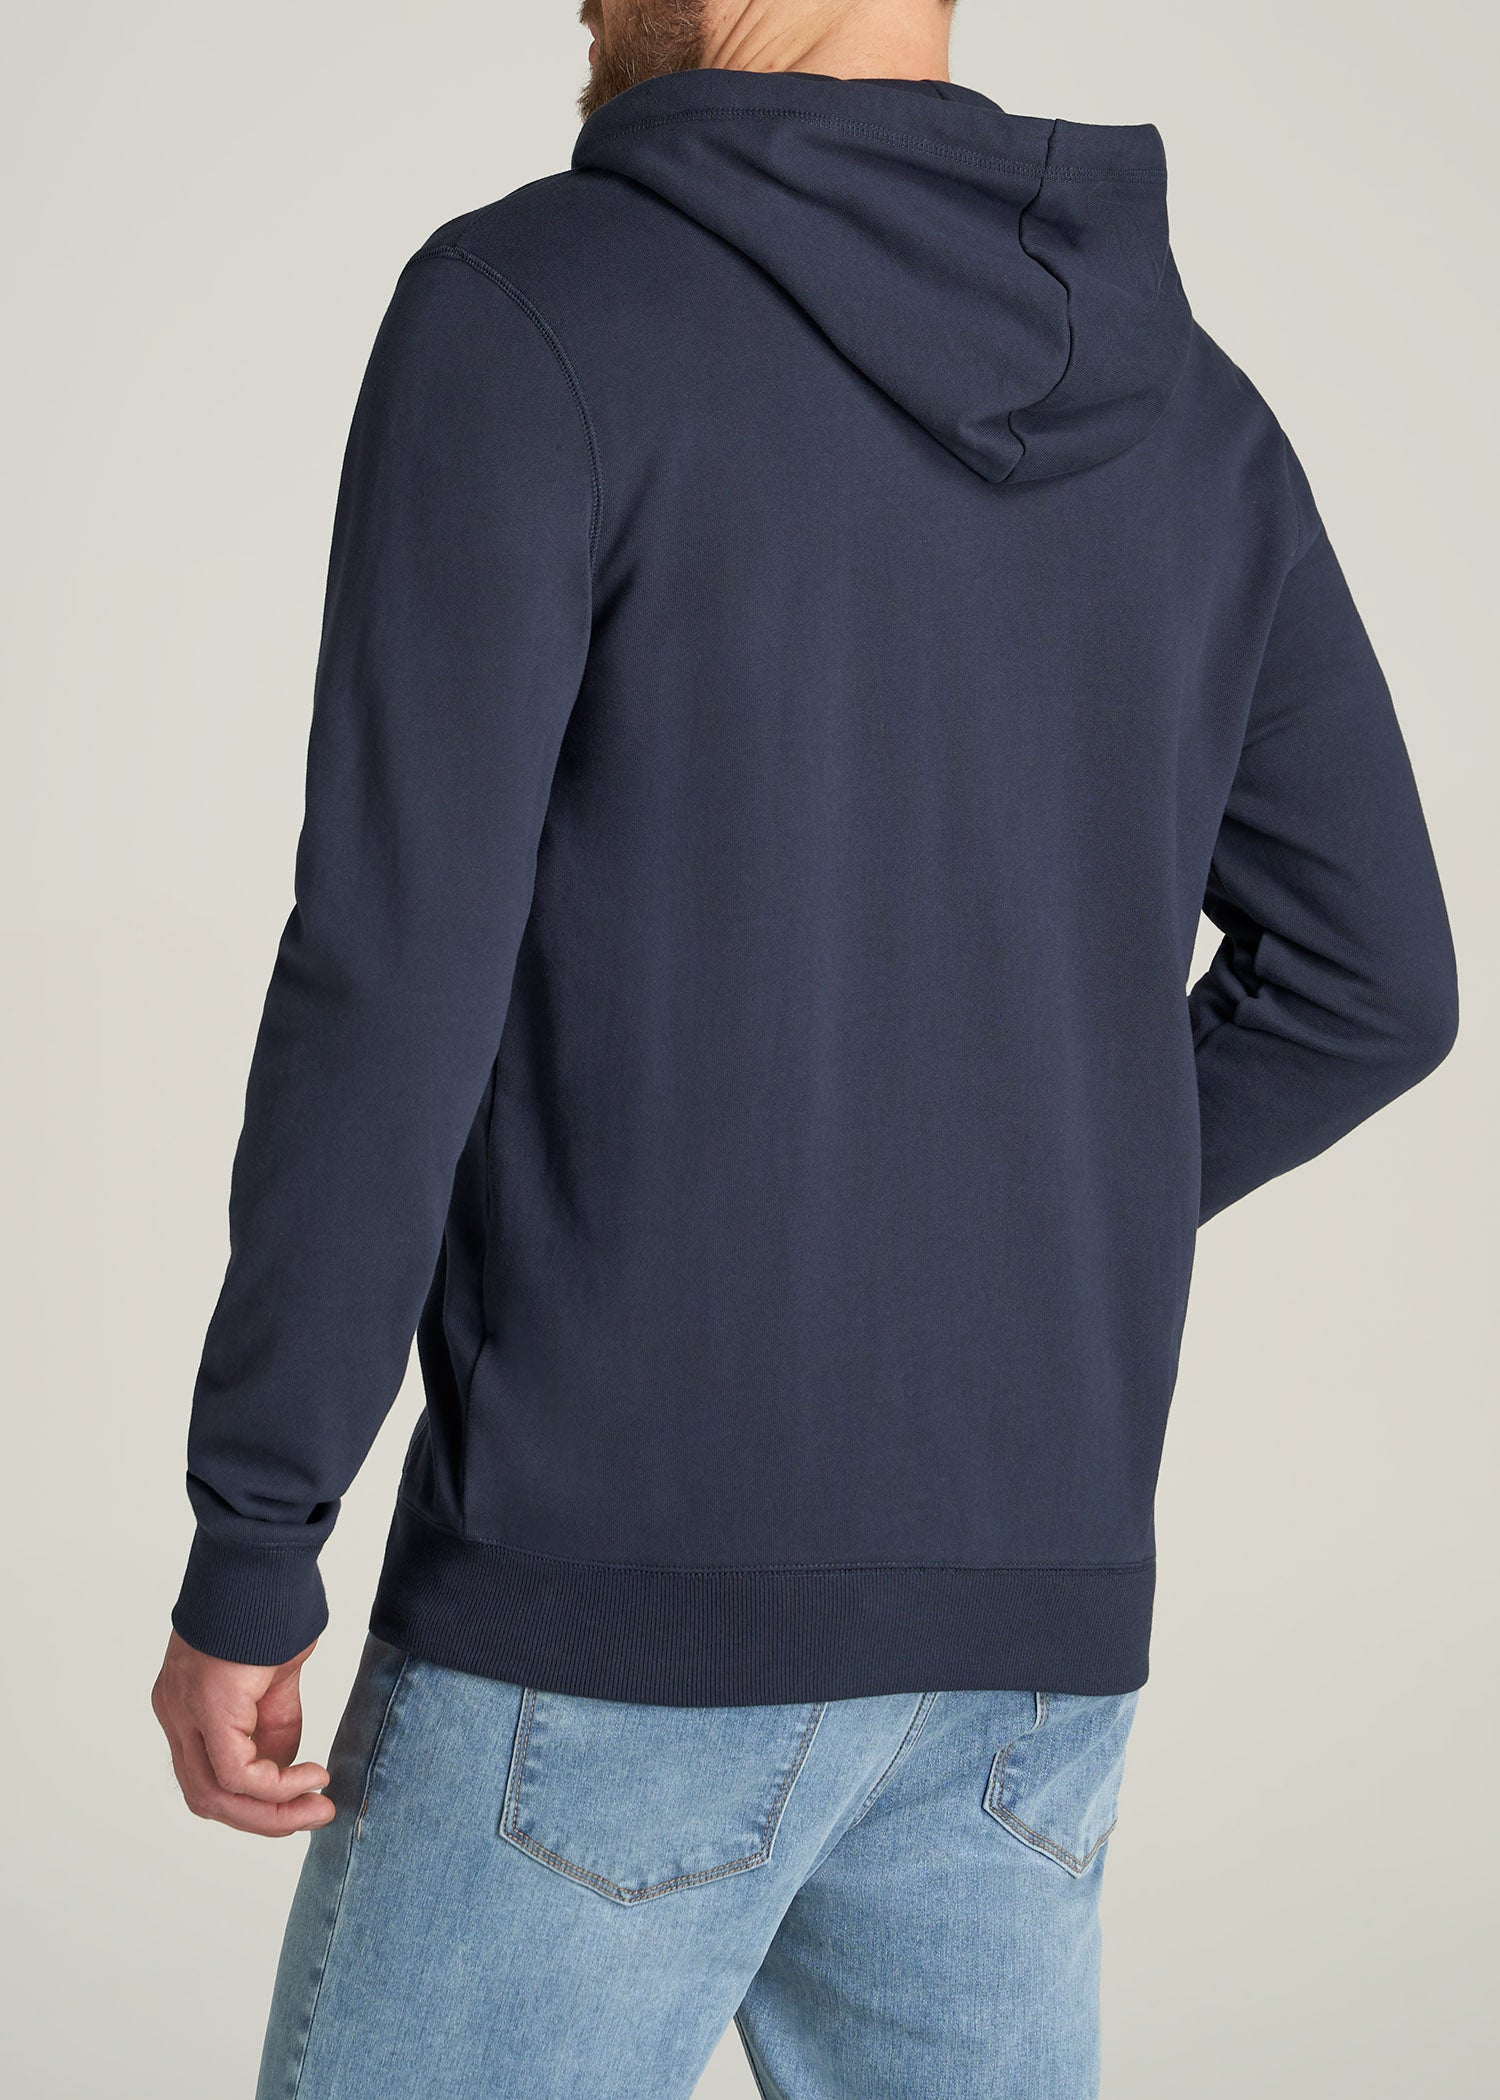    American-Tall-Men-8020-FrenchTerry-FullZip-Hoodie-Navy-back